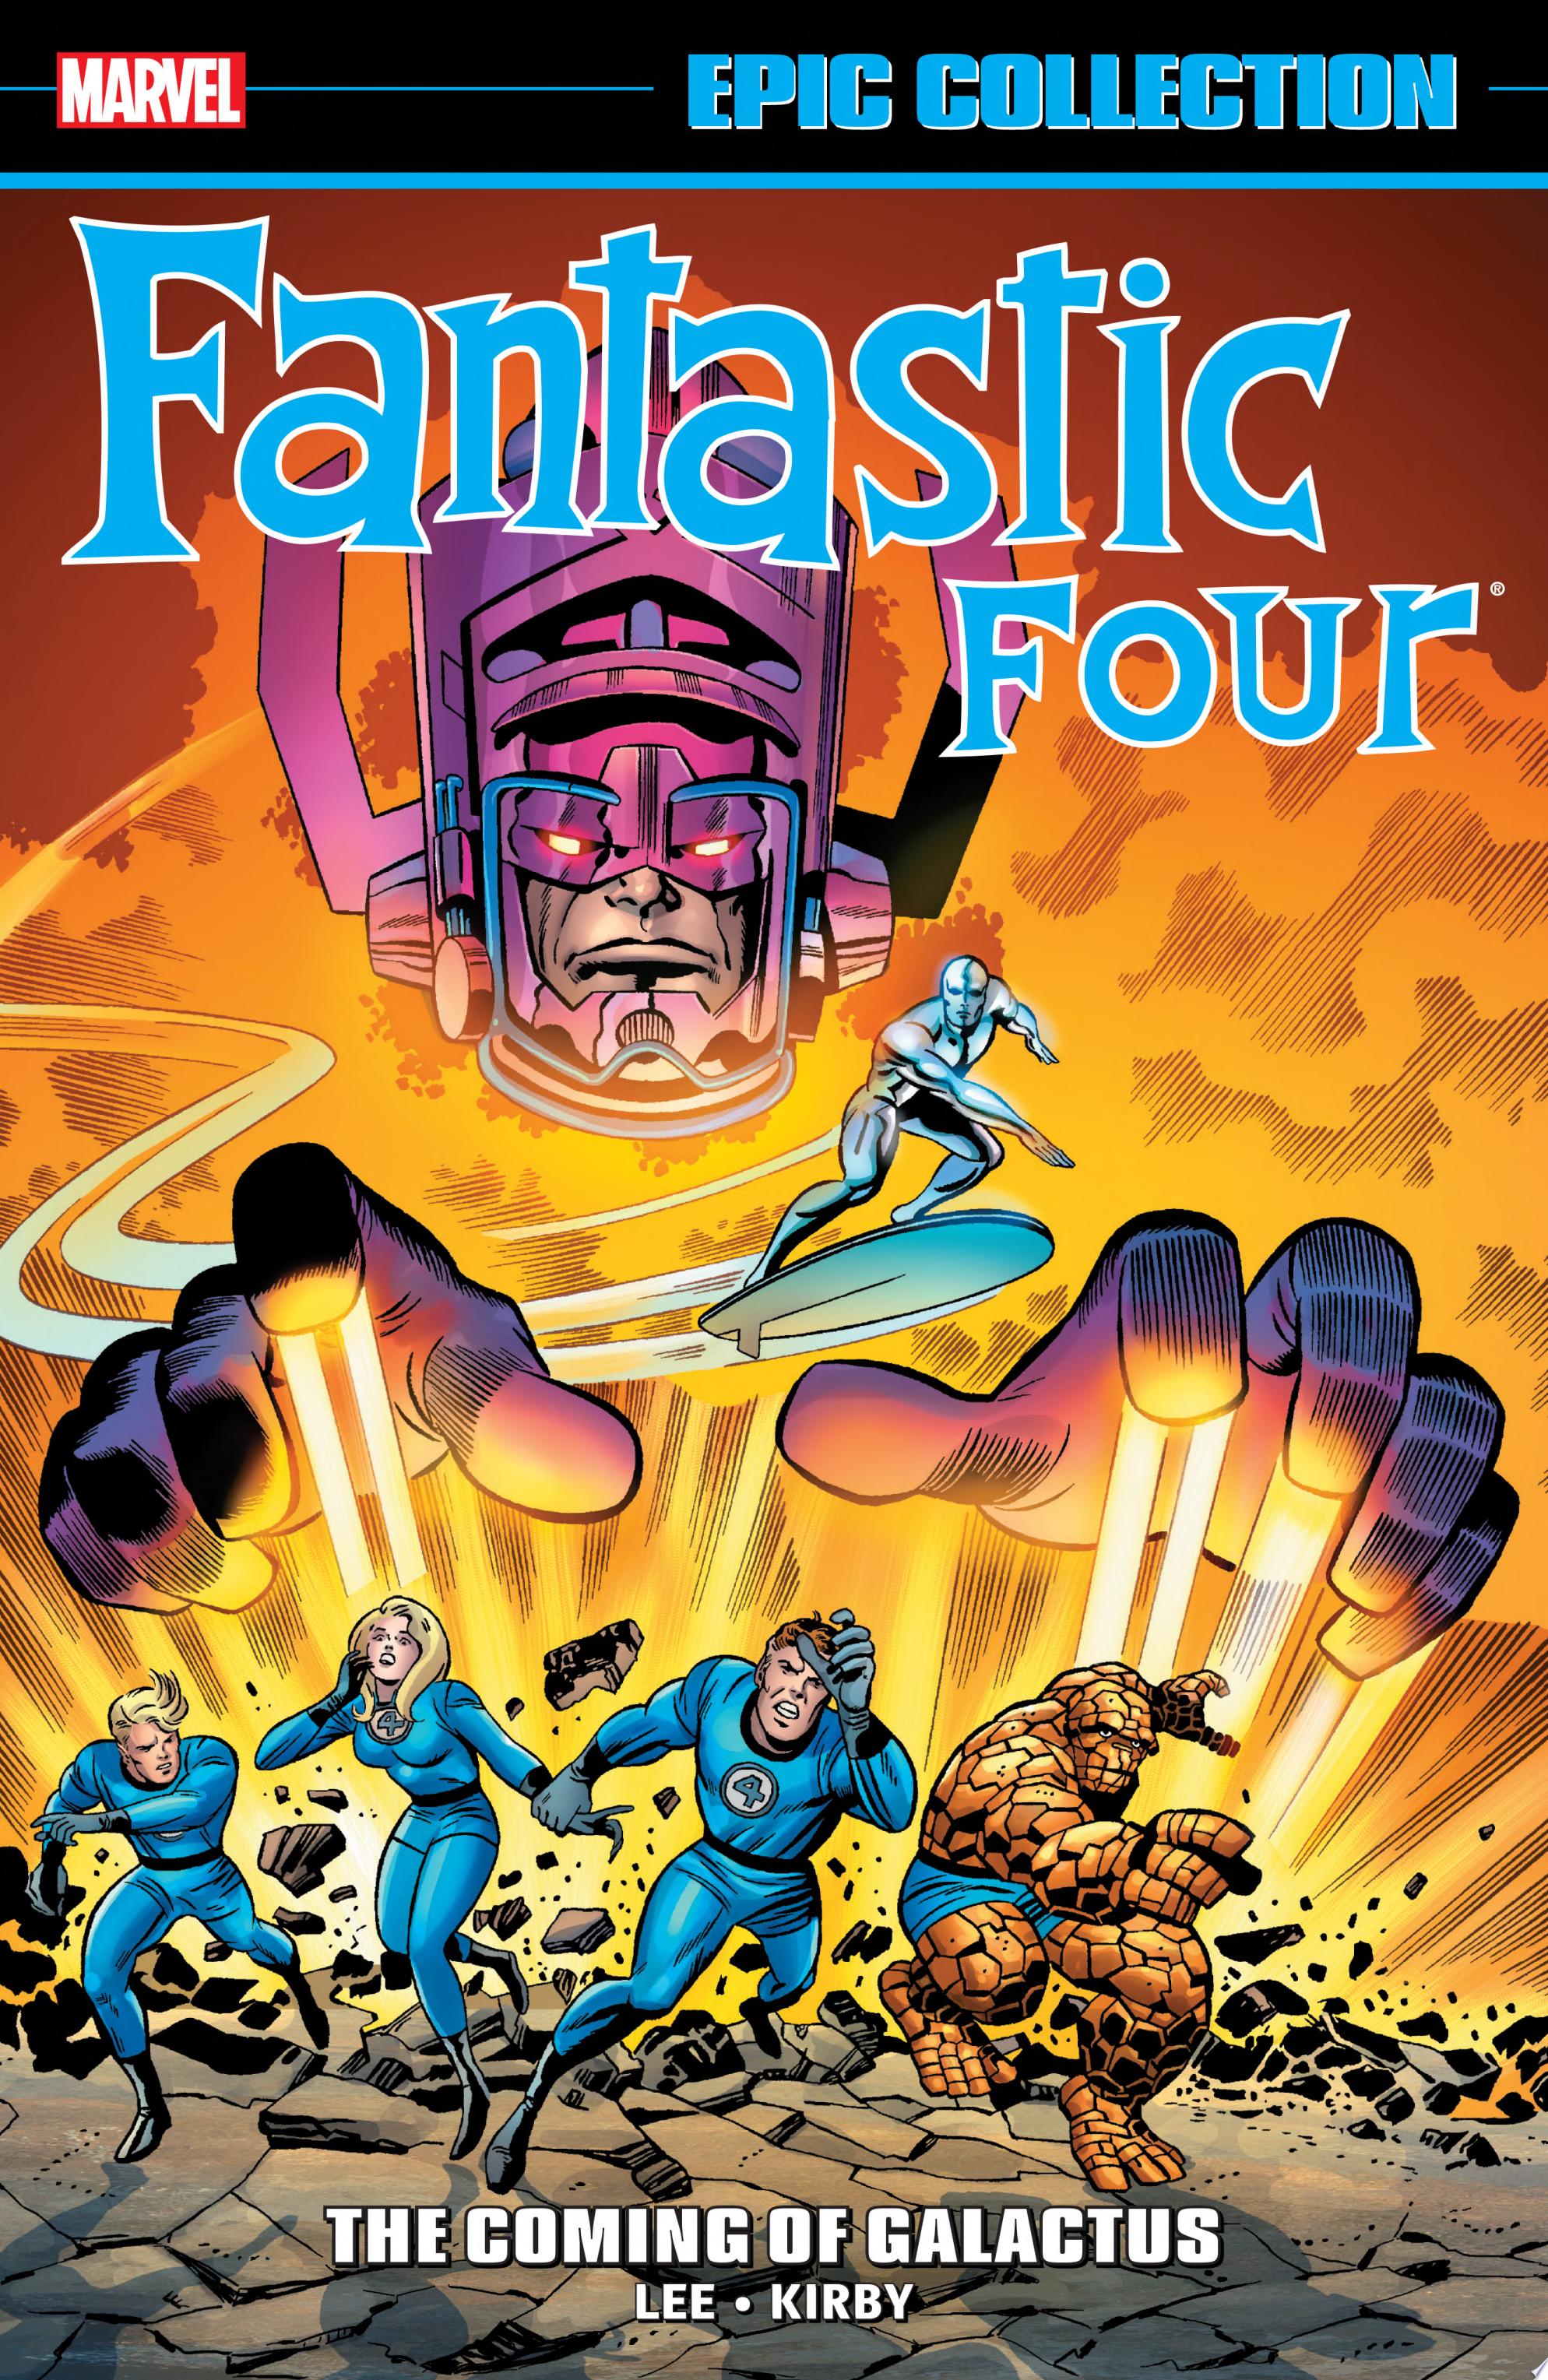 Image for "Fantastic Four Epic Collection"